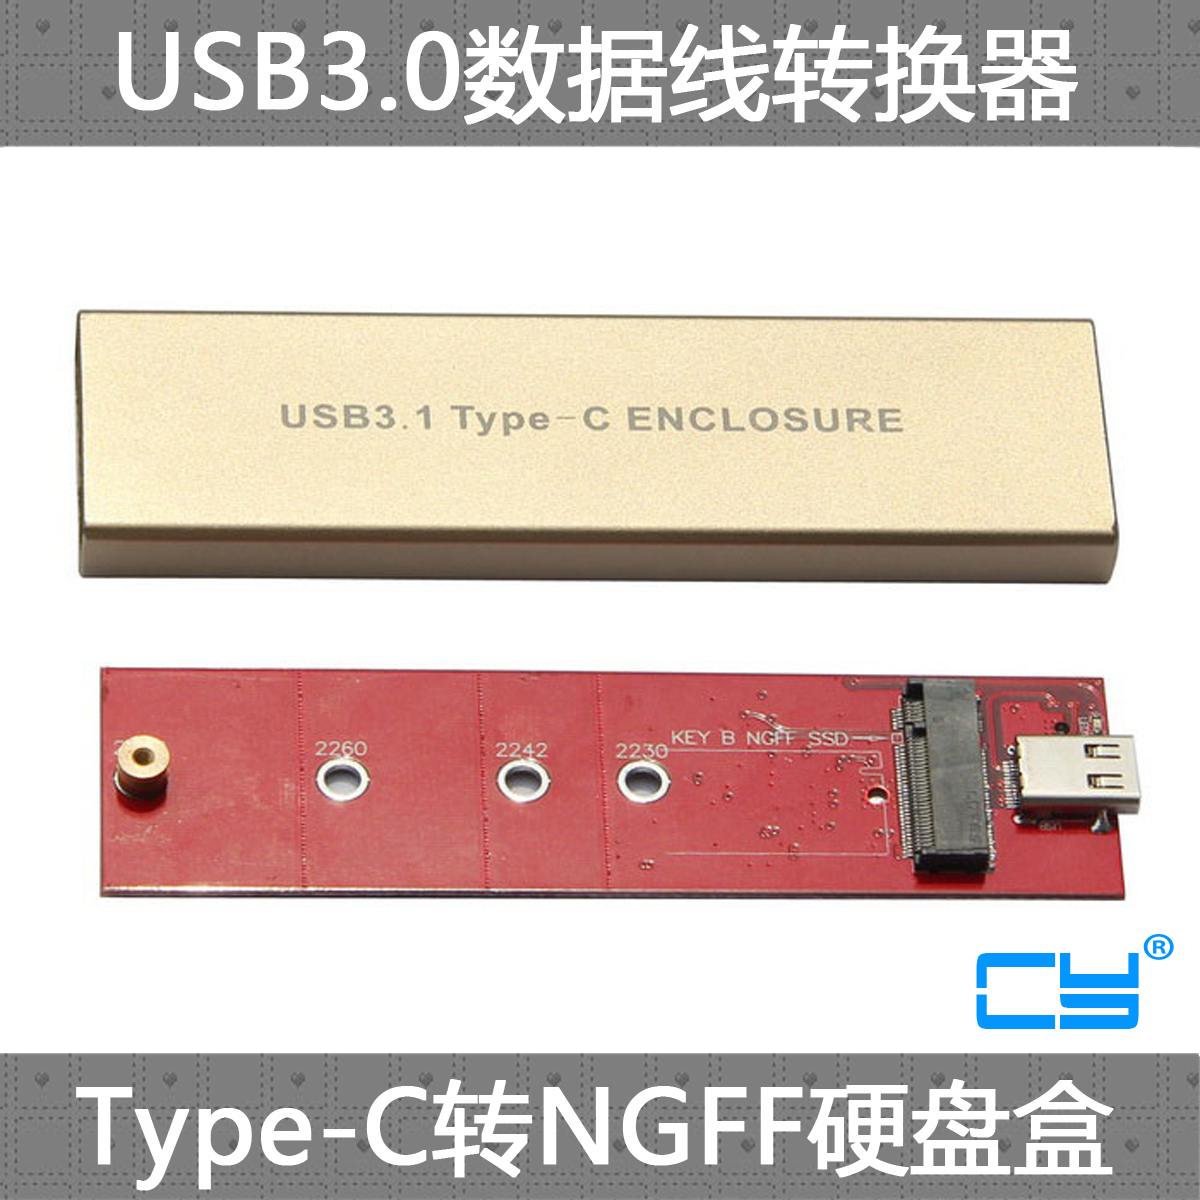 NGFF Hard Disk Box USb3.1 Type C to M.2 SSD Hard Disk Box Specification 2230/2242/2280